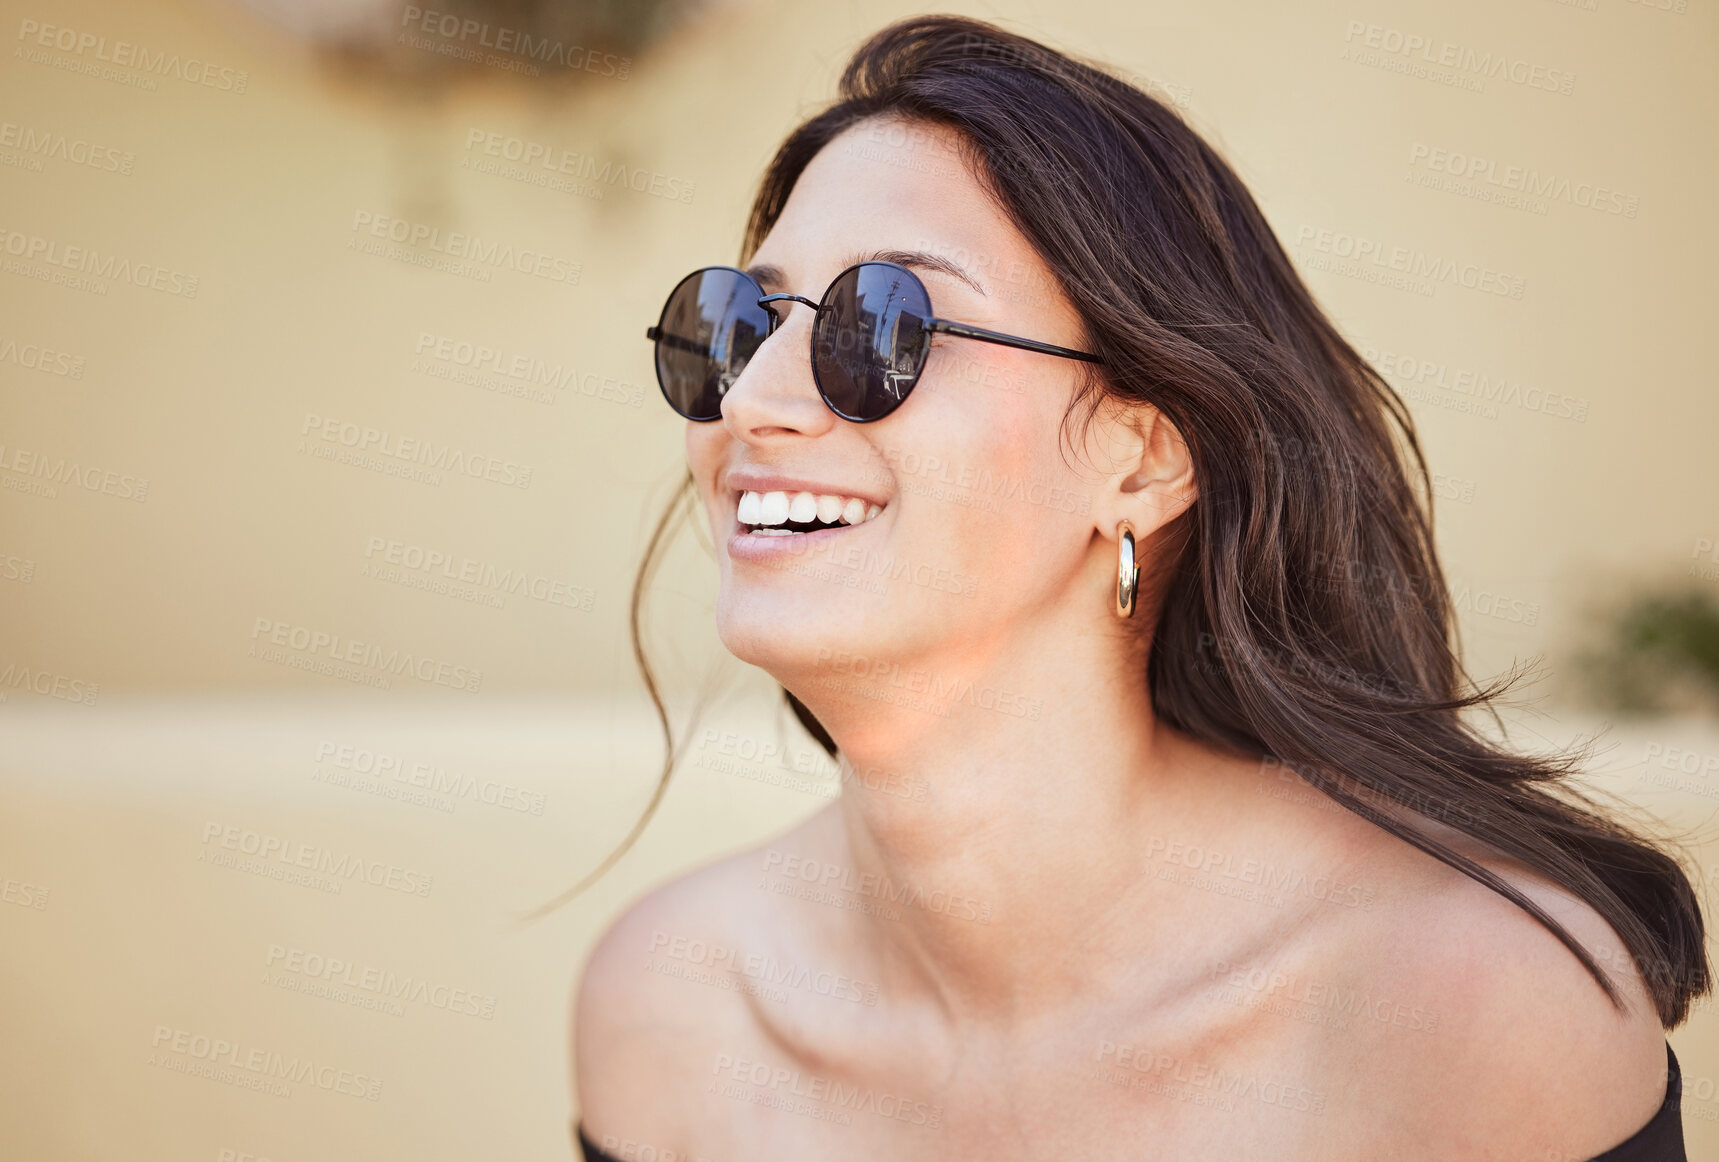 Buy stock photo Smiling cheerful mixed race woman wearing sunglasses while standing outside on sidewalk. Joyful young brunette woman looking stylish on a summer day